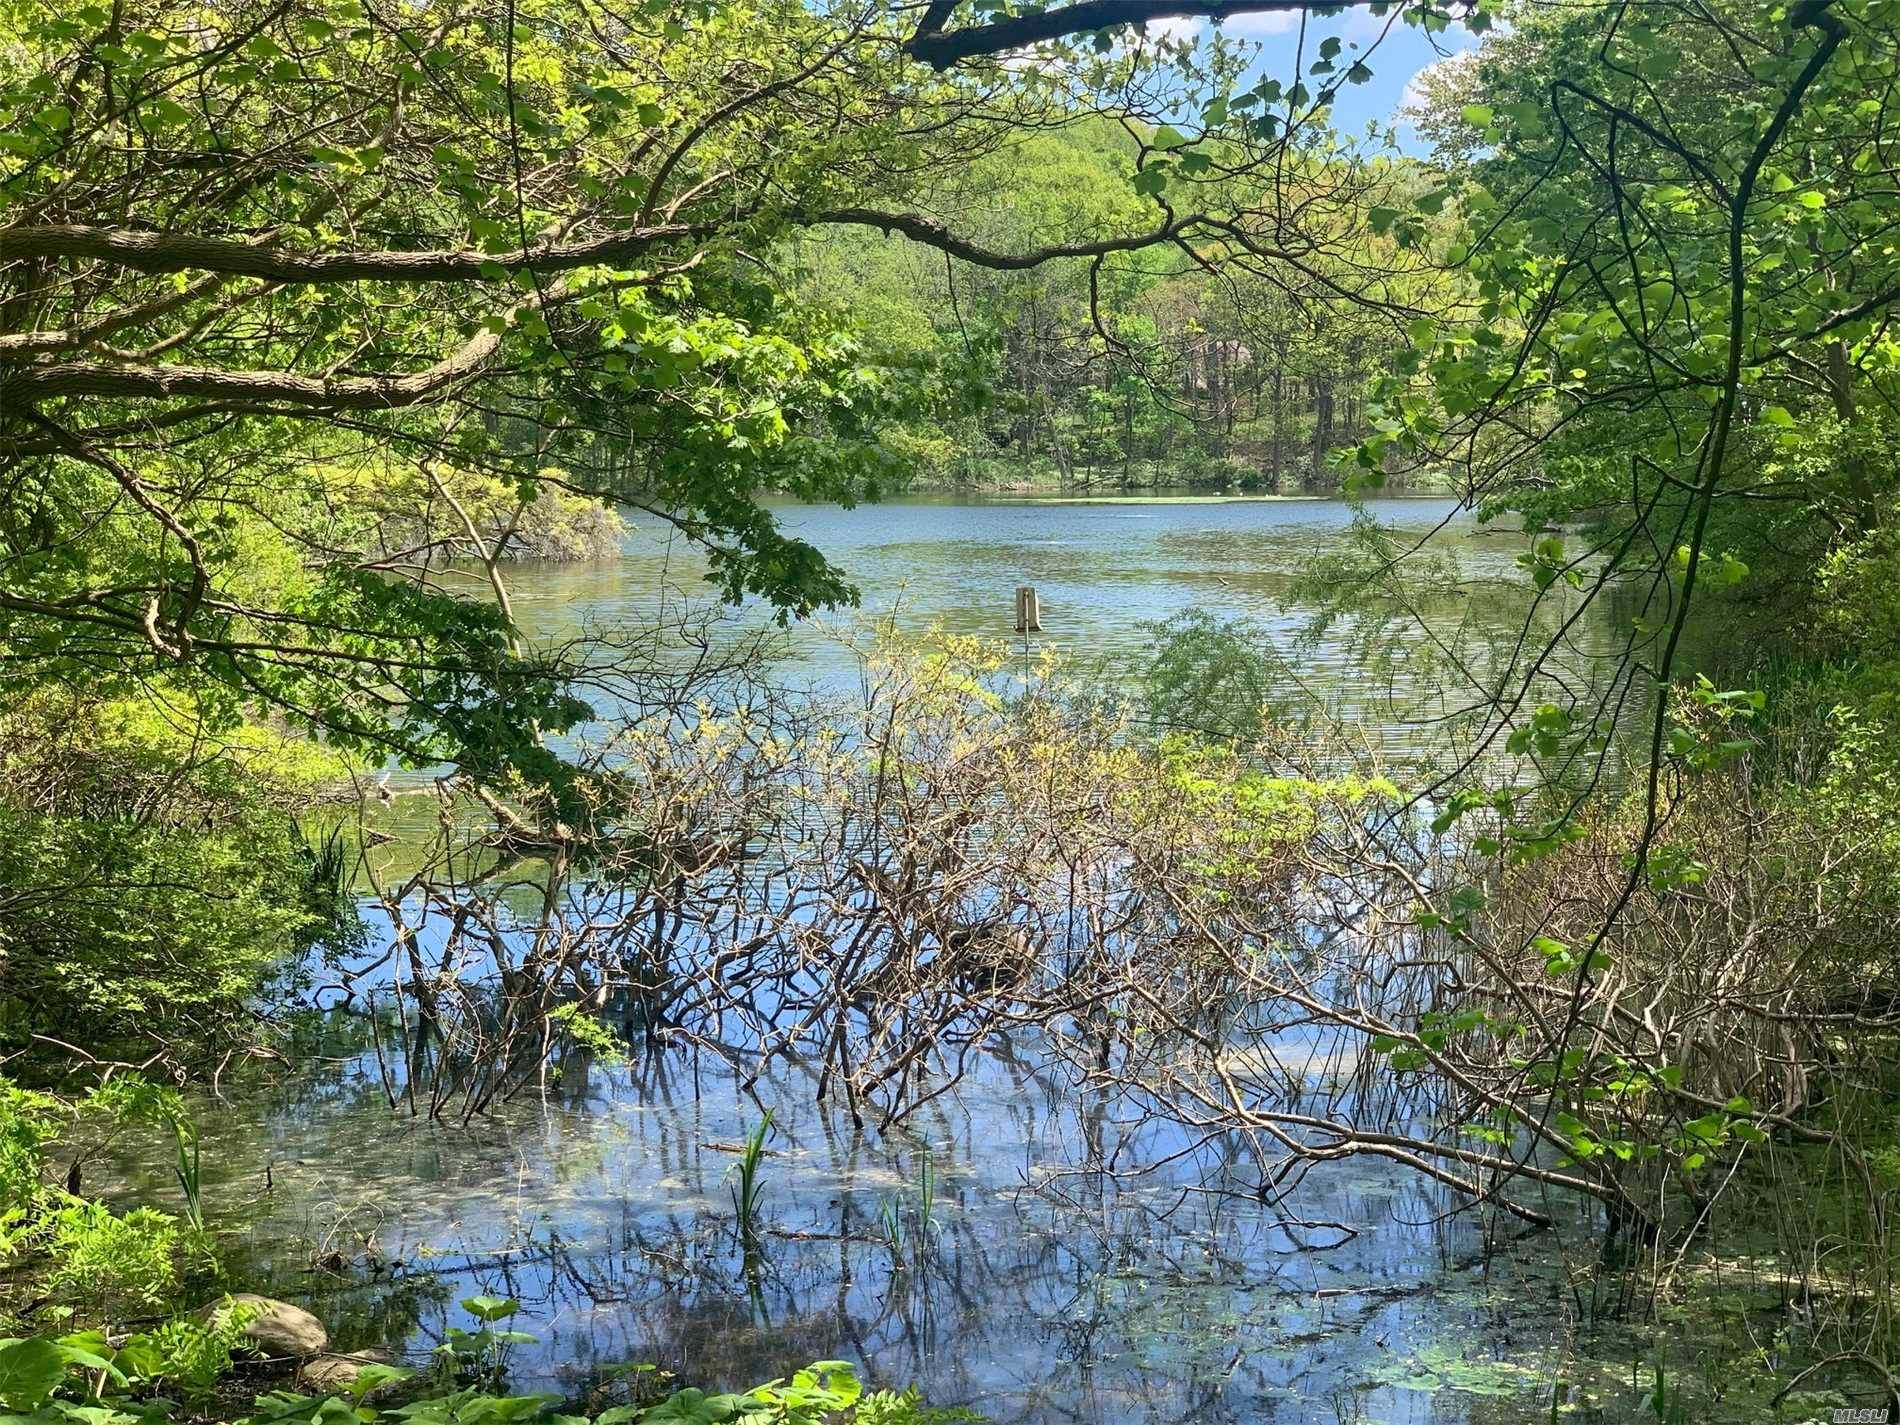 On Golden Pond. Set on the west side of Lloyd Neck, this is a wonderful opportunity to build your dream home on gorgeous lush acreage overlooking a lovely pond and ...